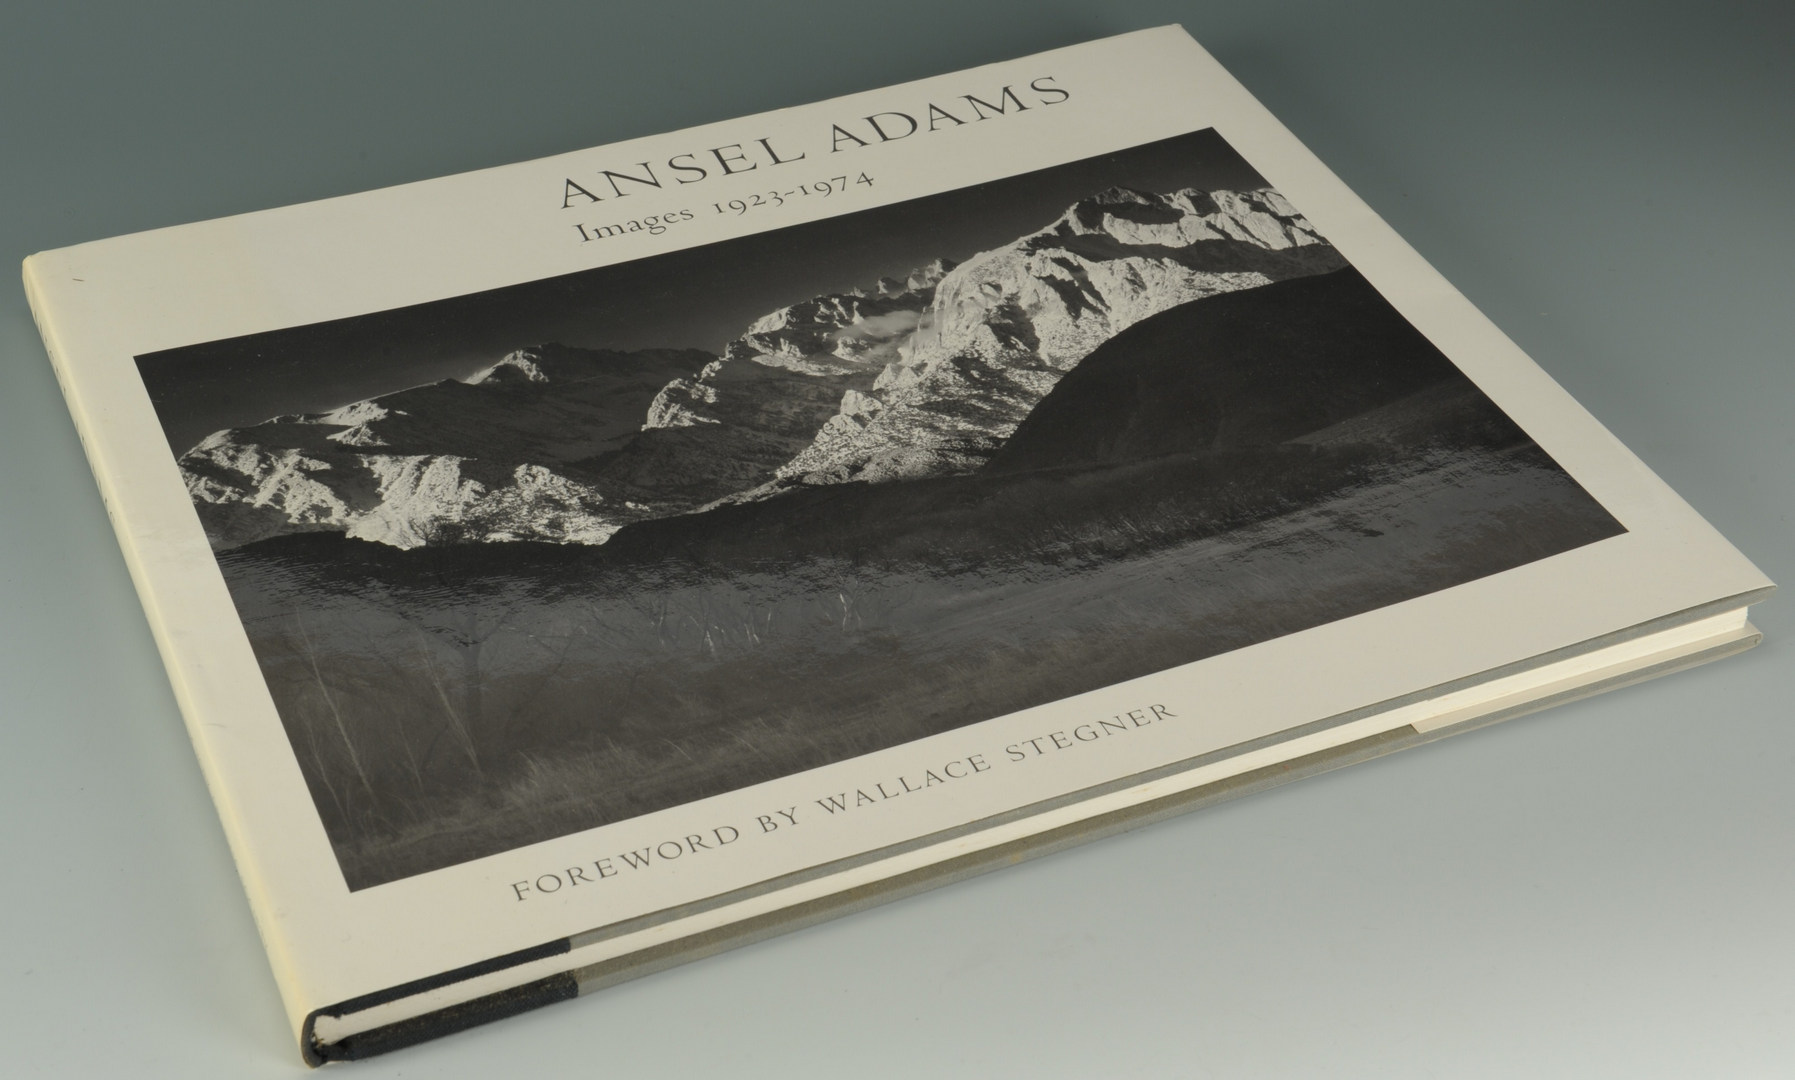 Lot 157: Ansel Adams, Images 1923-1974, 1st edition book